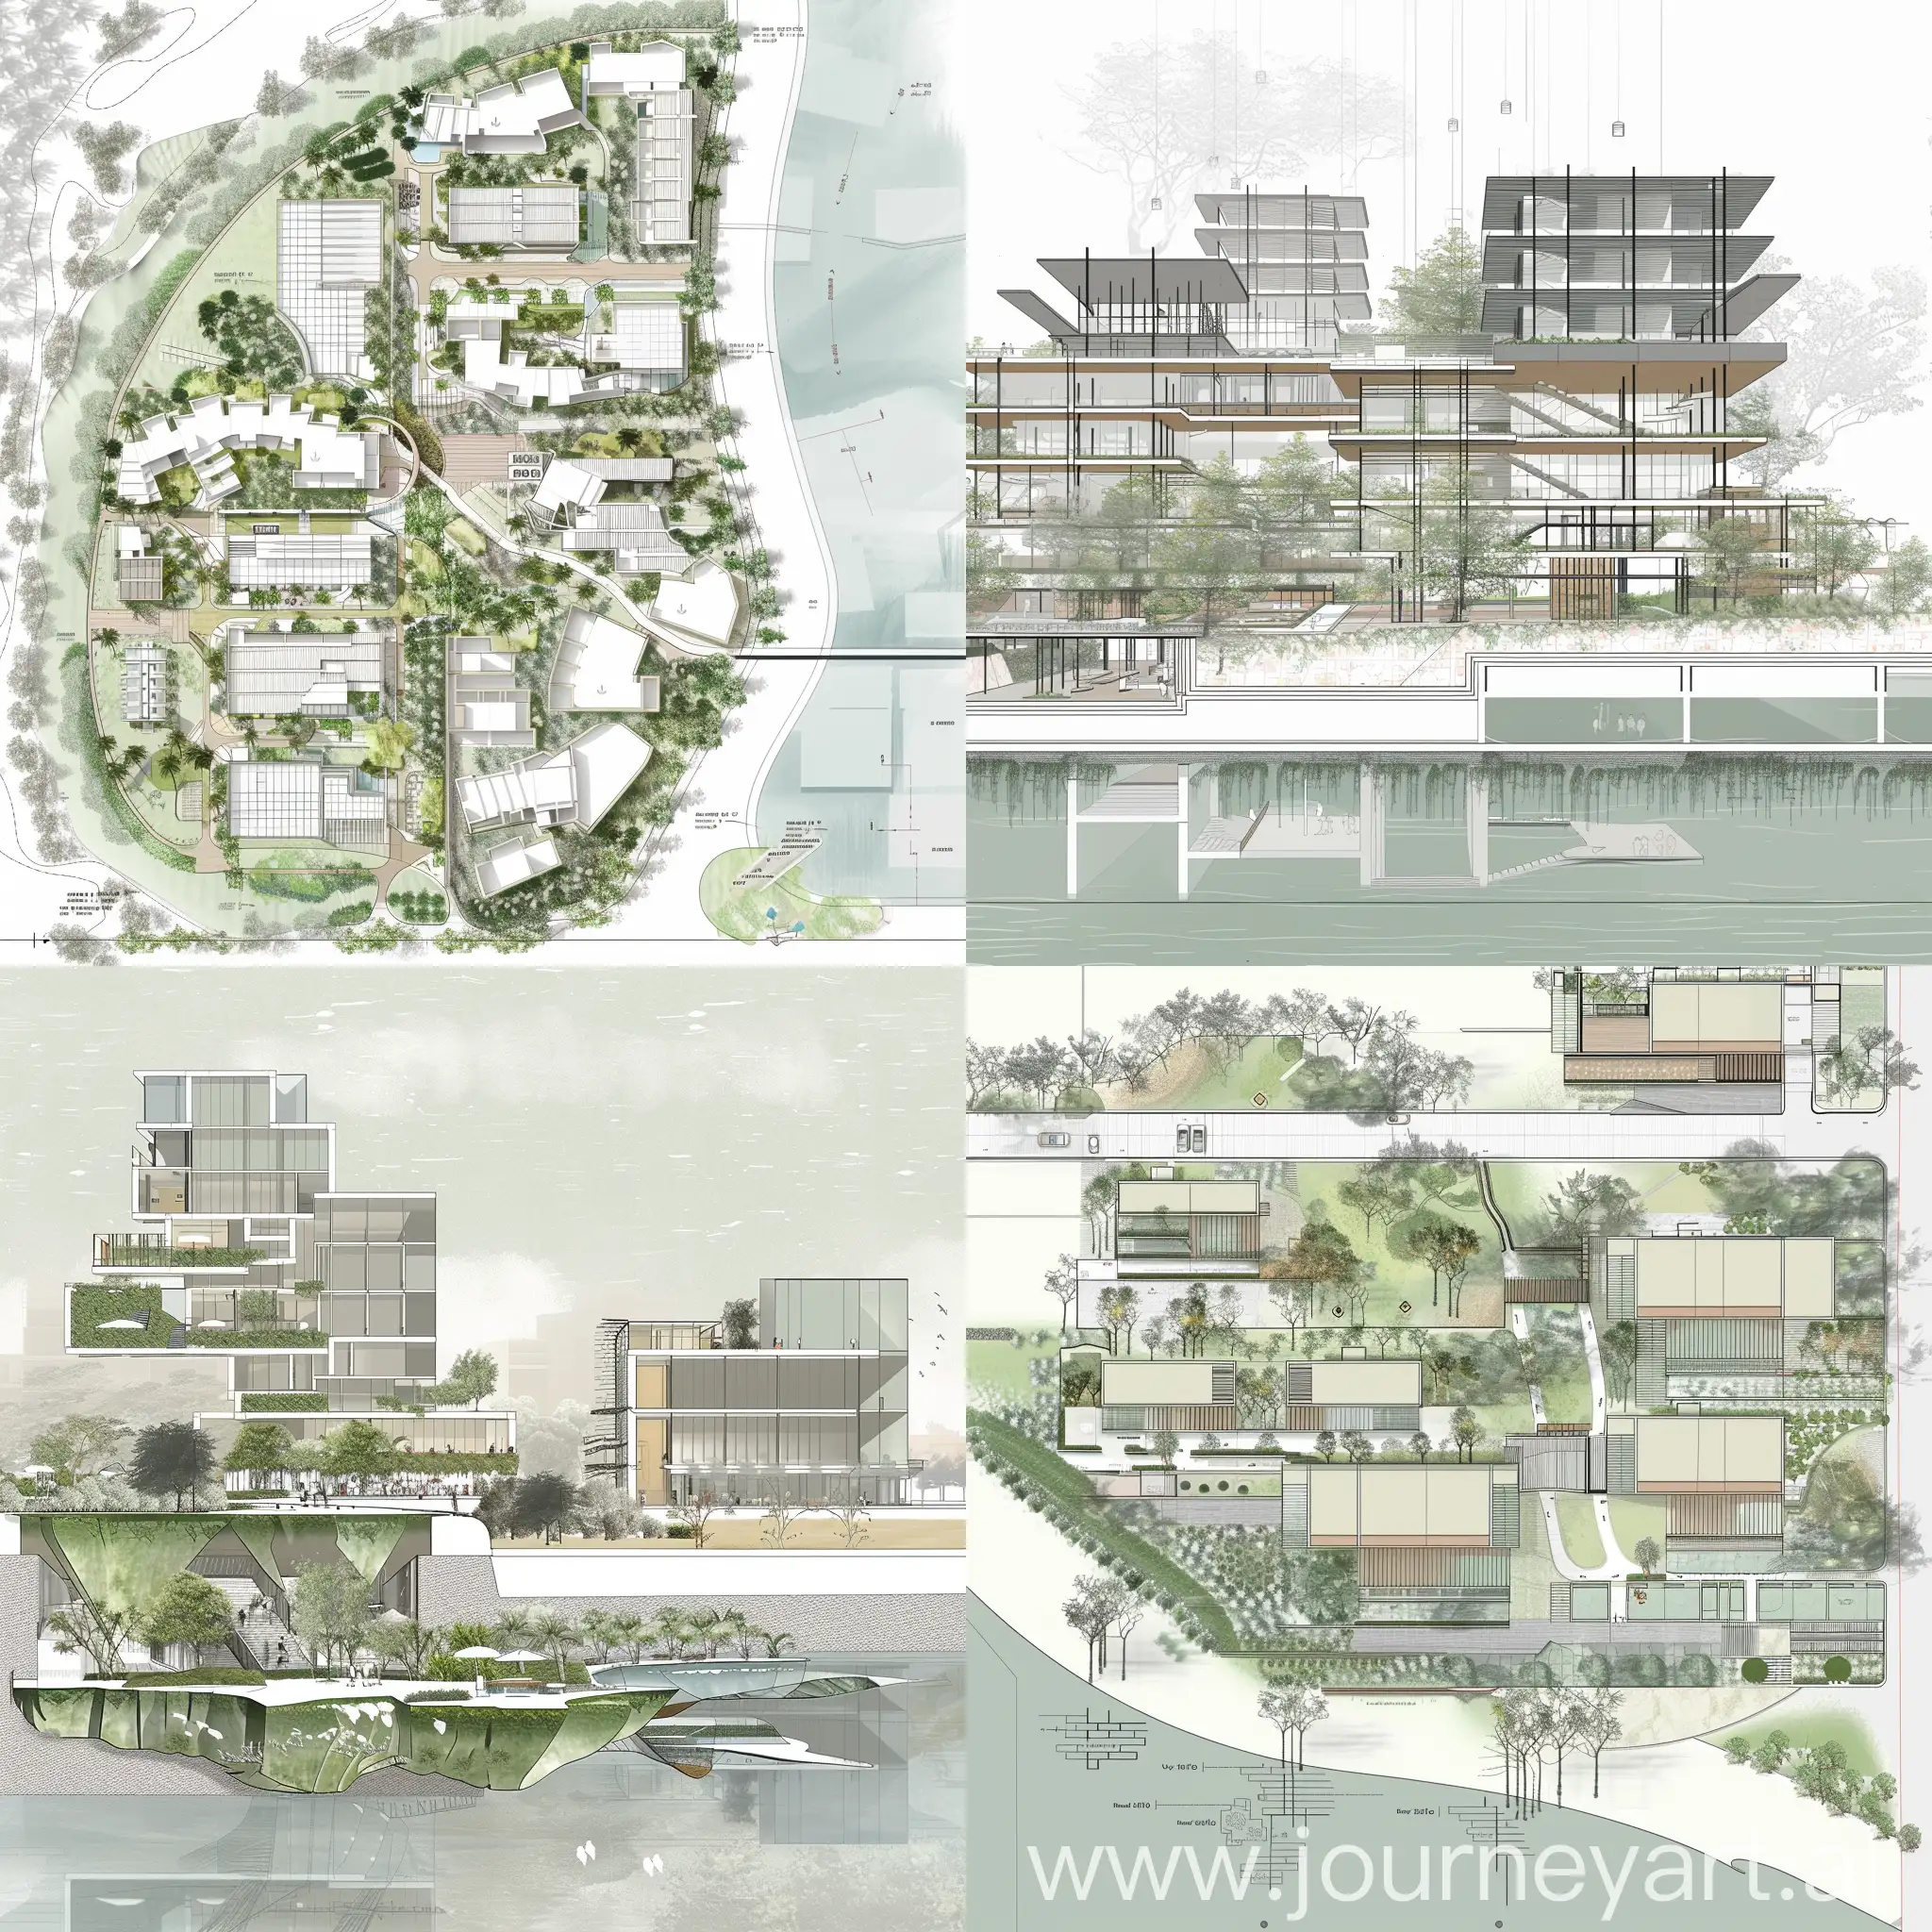 MangroveInspired-Business-Park-Architecture-Plan-and-Section